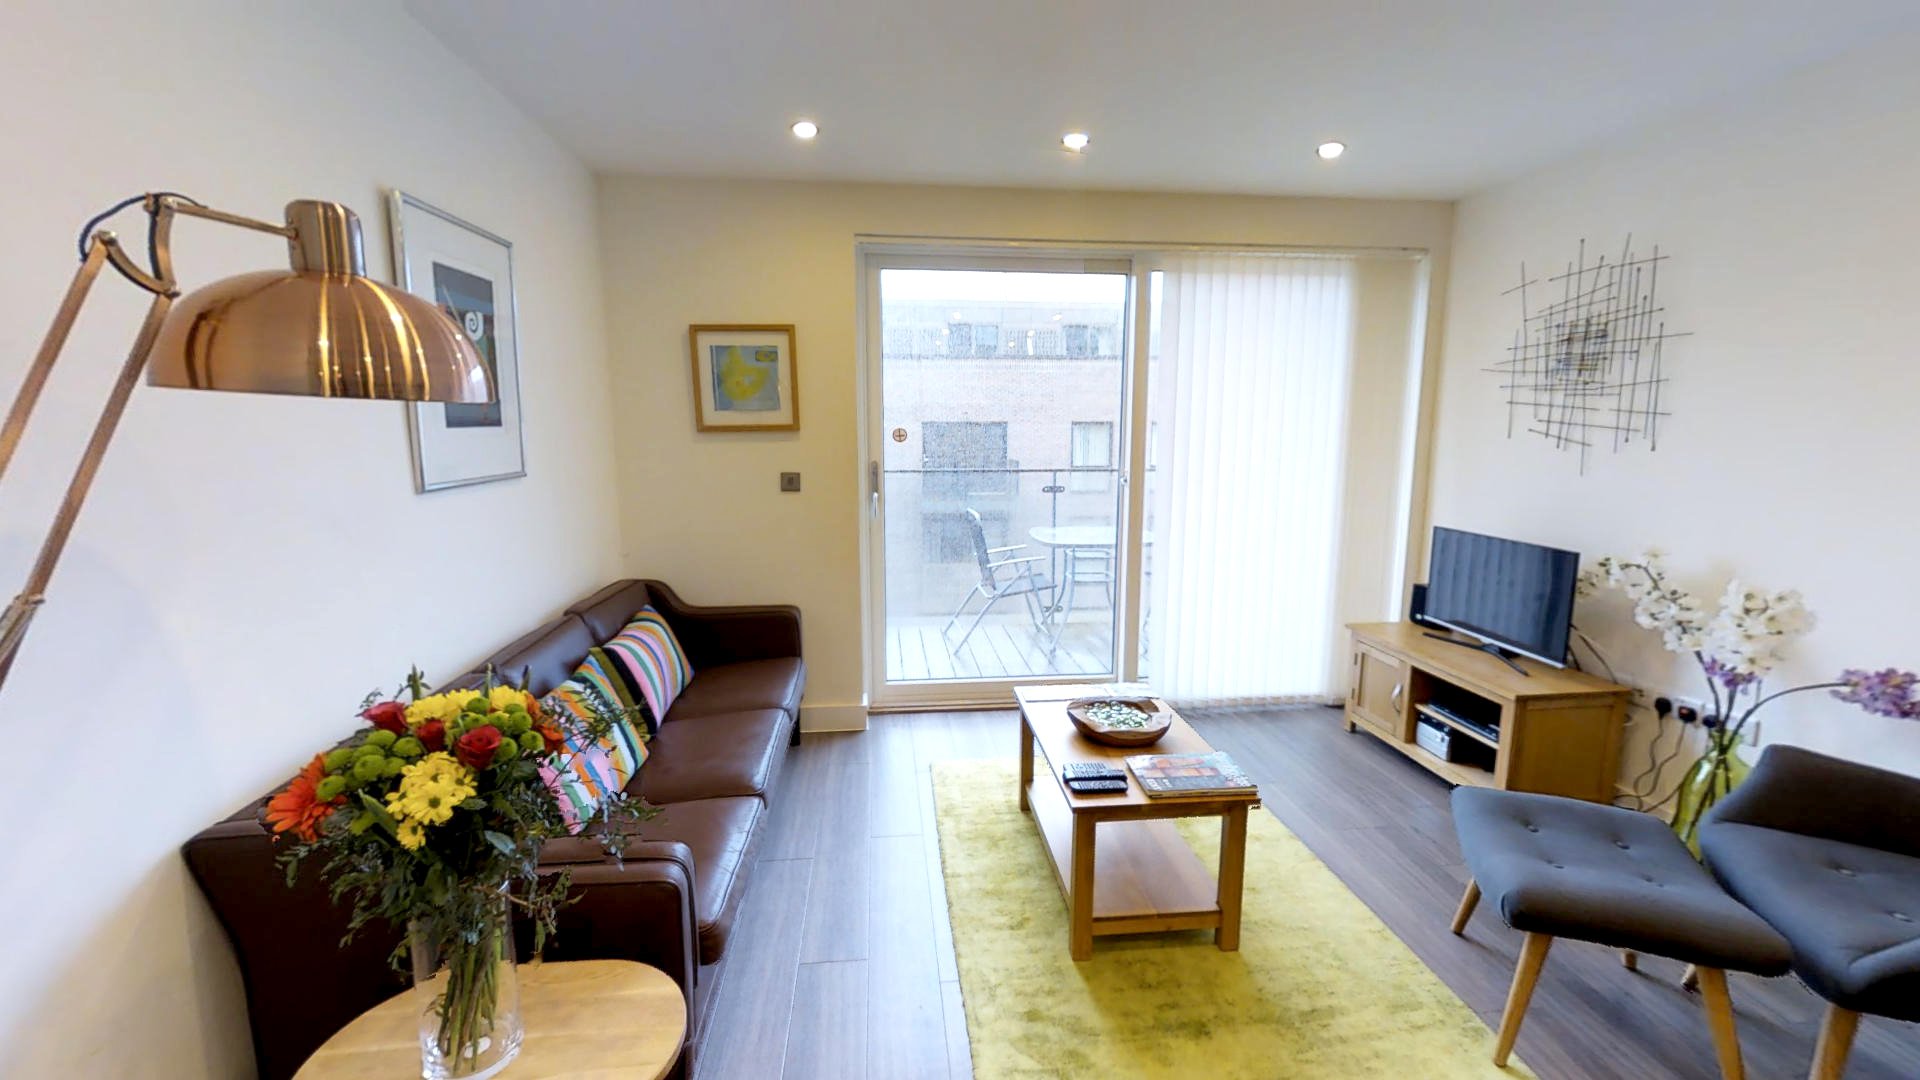 Serviced Accommodation Cambridge |Stylish Short Let Apartments | 24h reception | Free Wifi & Parking | Lift |0208 6913920| Urban Stay